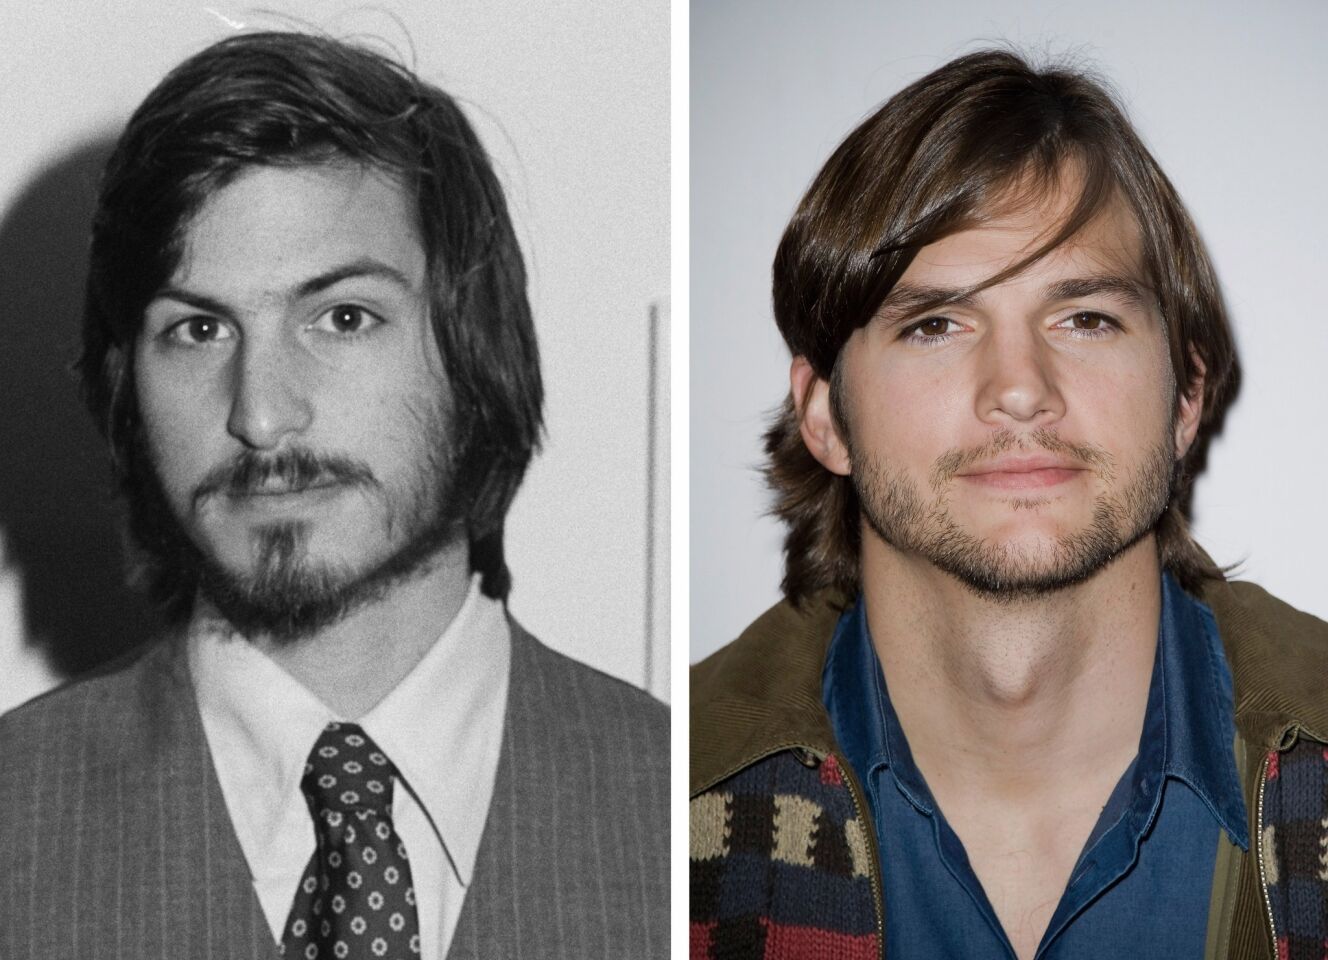 Steve Jobs, left, co-founder of Apple Computer Inc., is pictured in April 1977 at the first West Coast Computer Faire, where the Apple II computer debuted. Actor Ashton Kutcher, right, is seen in 2011.